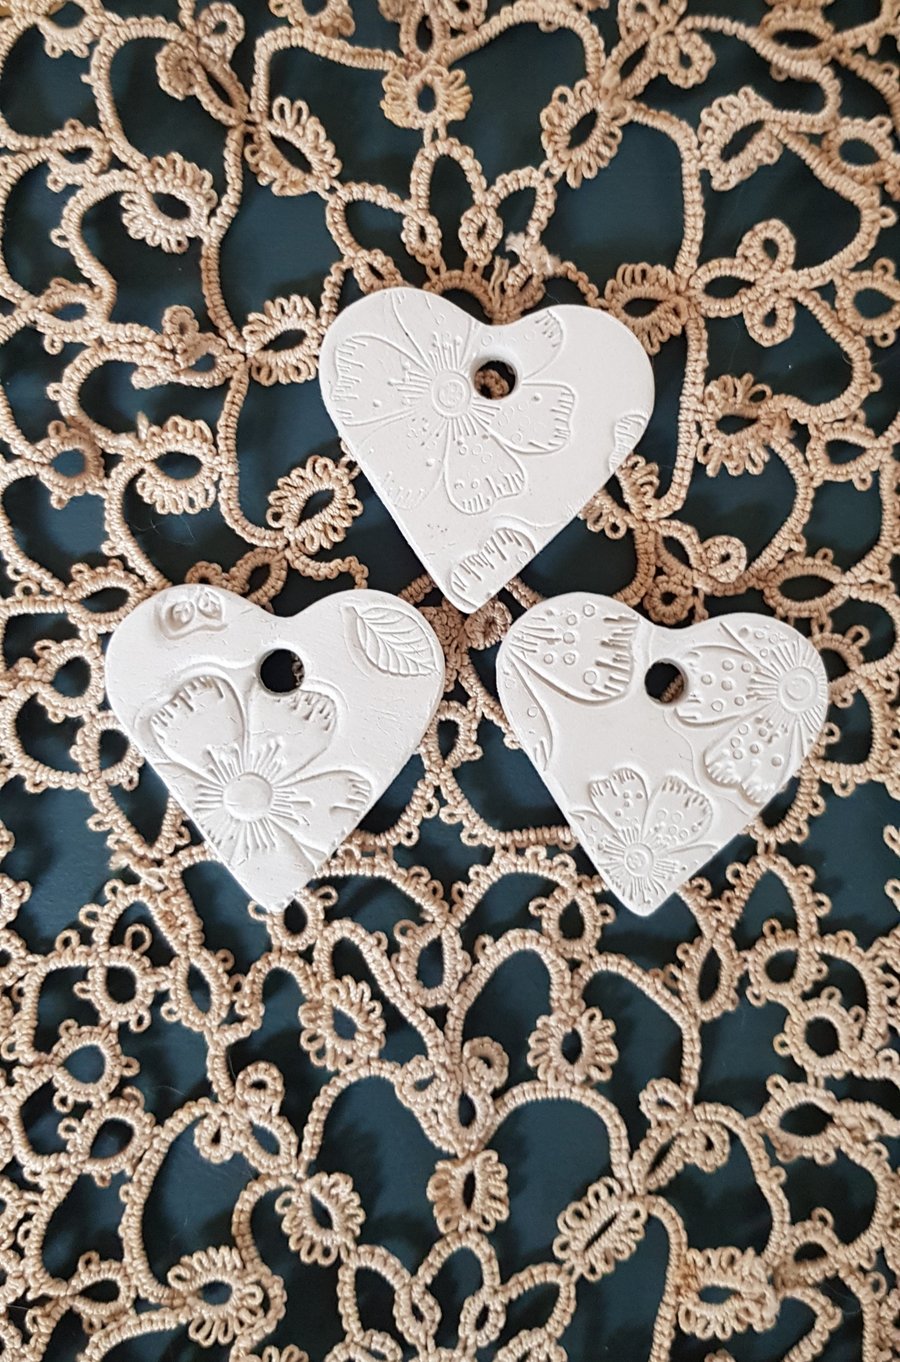 Air dry clay gift tags, ornaments, tree decorations, wedding favors. 